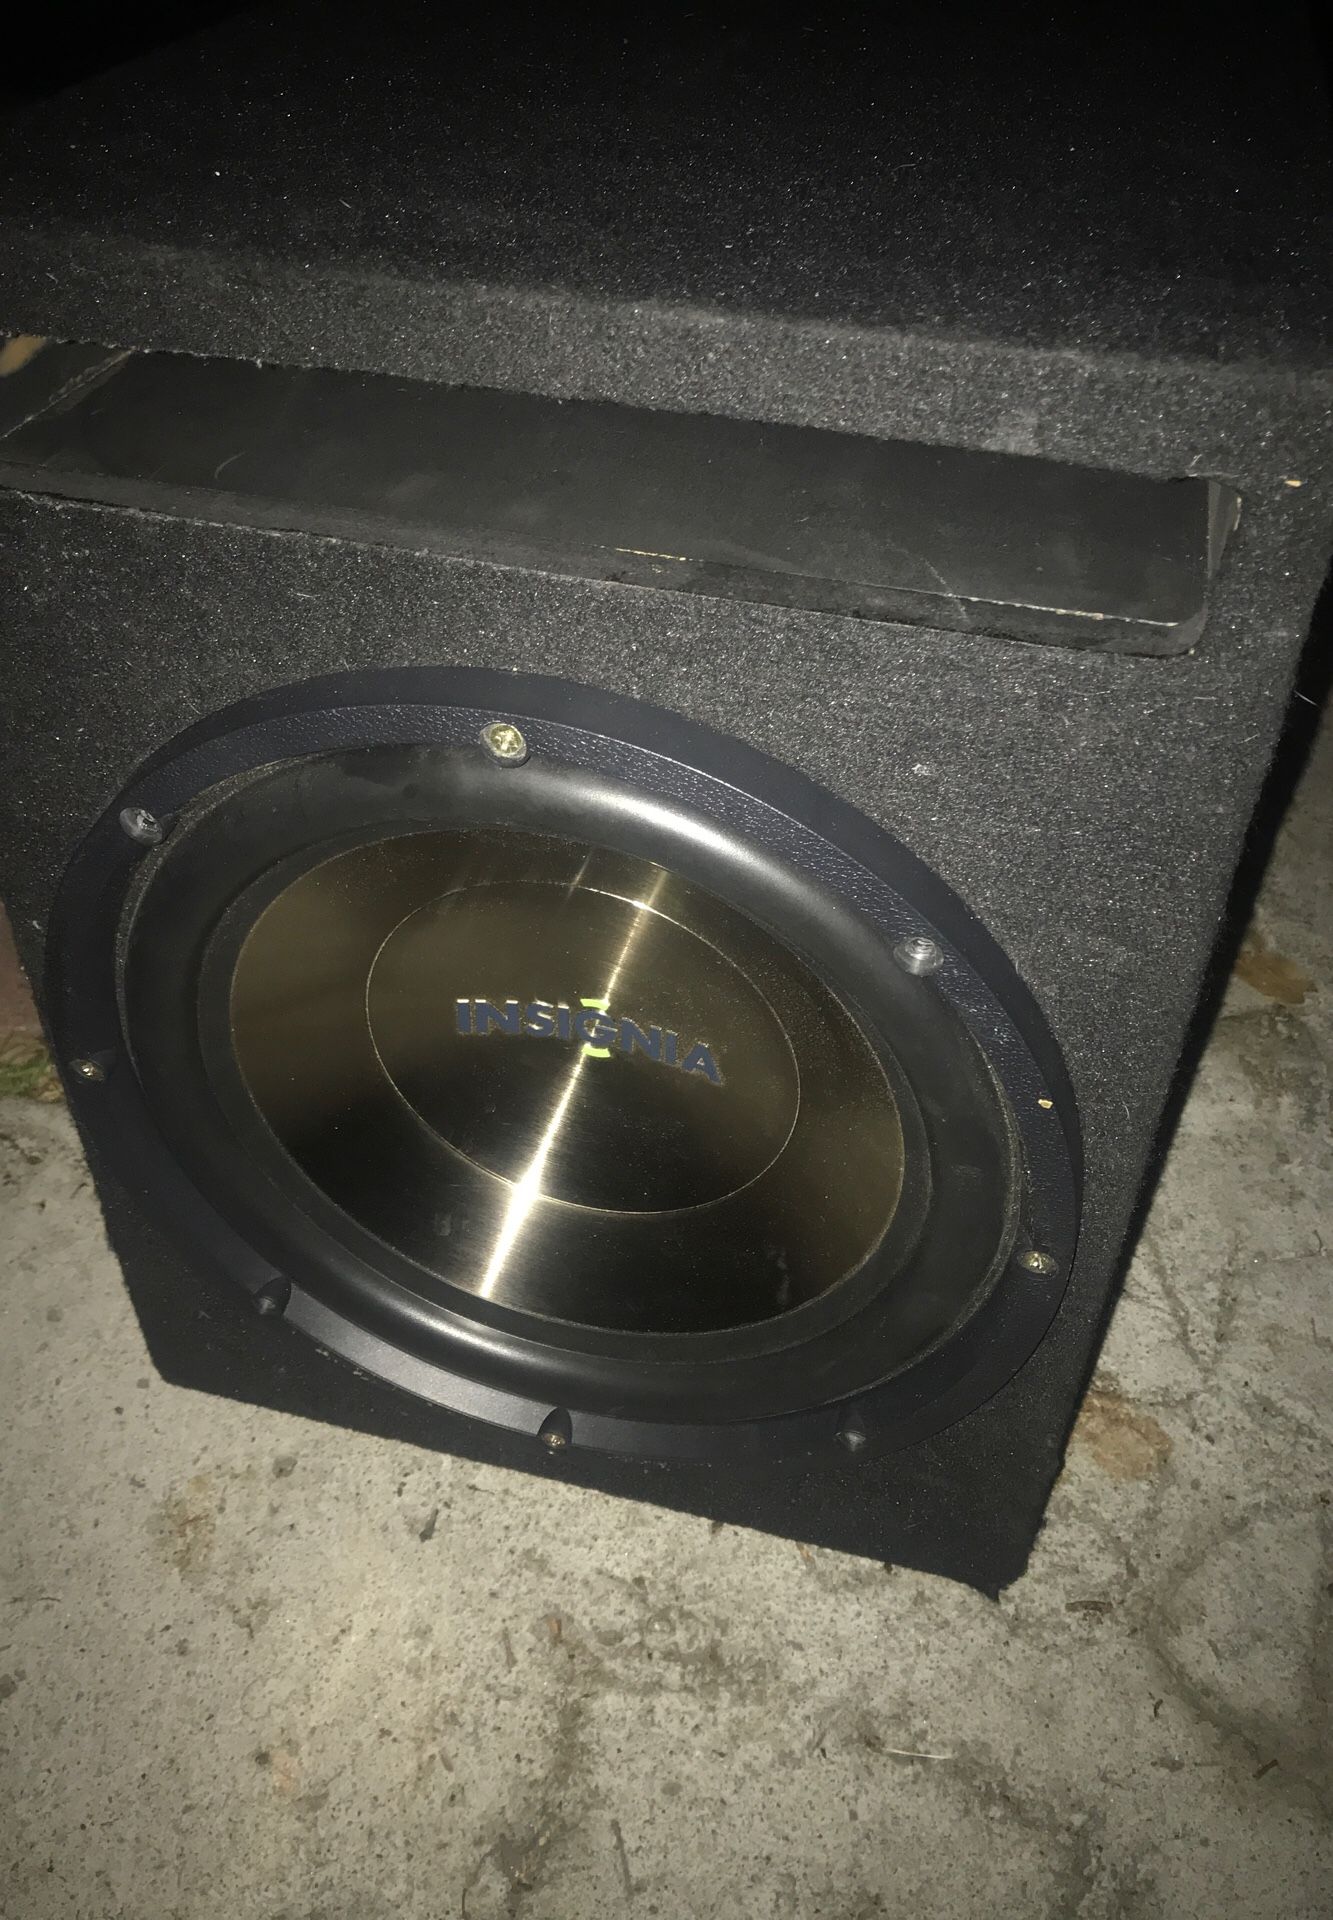 12” subwoofer with box